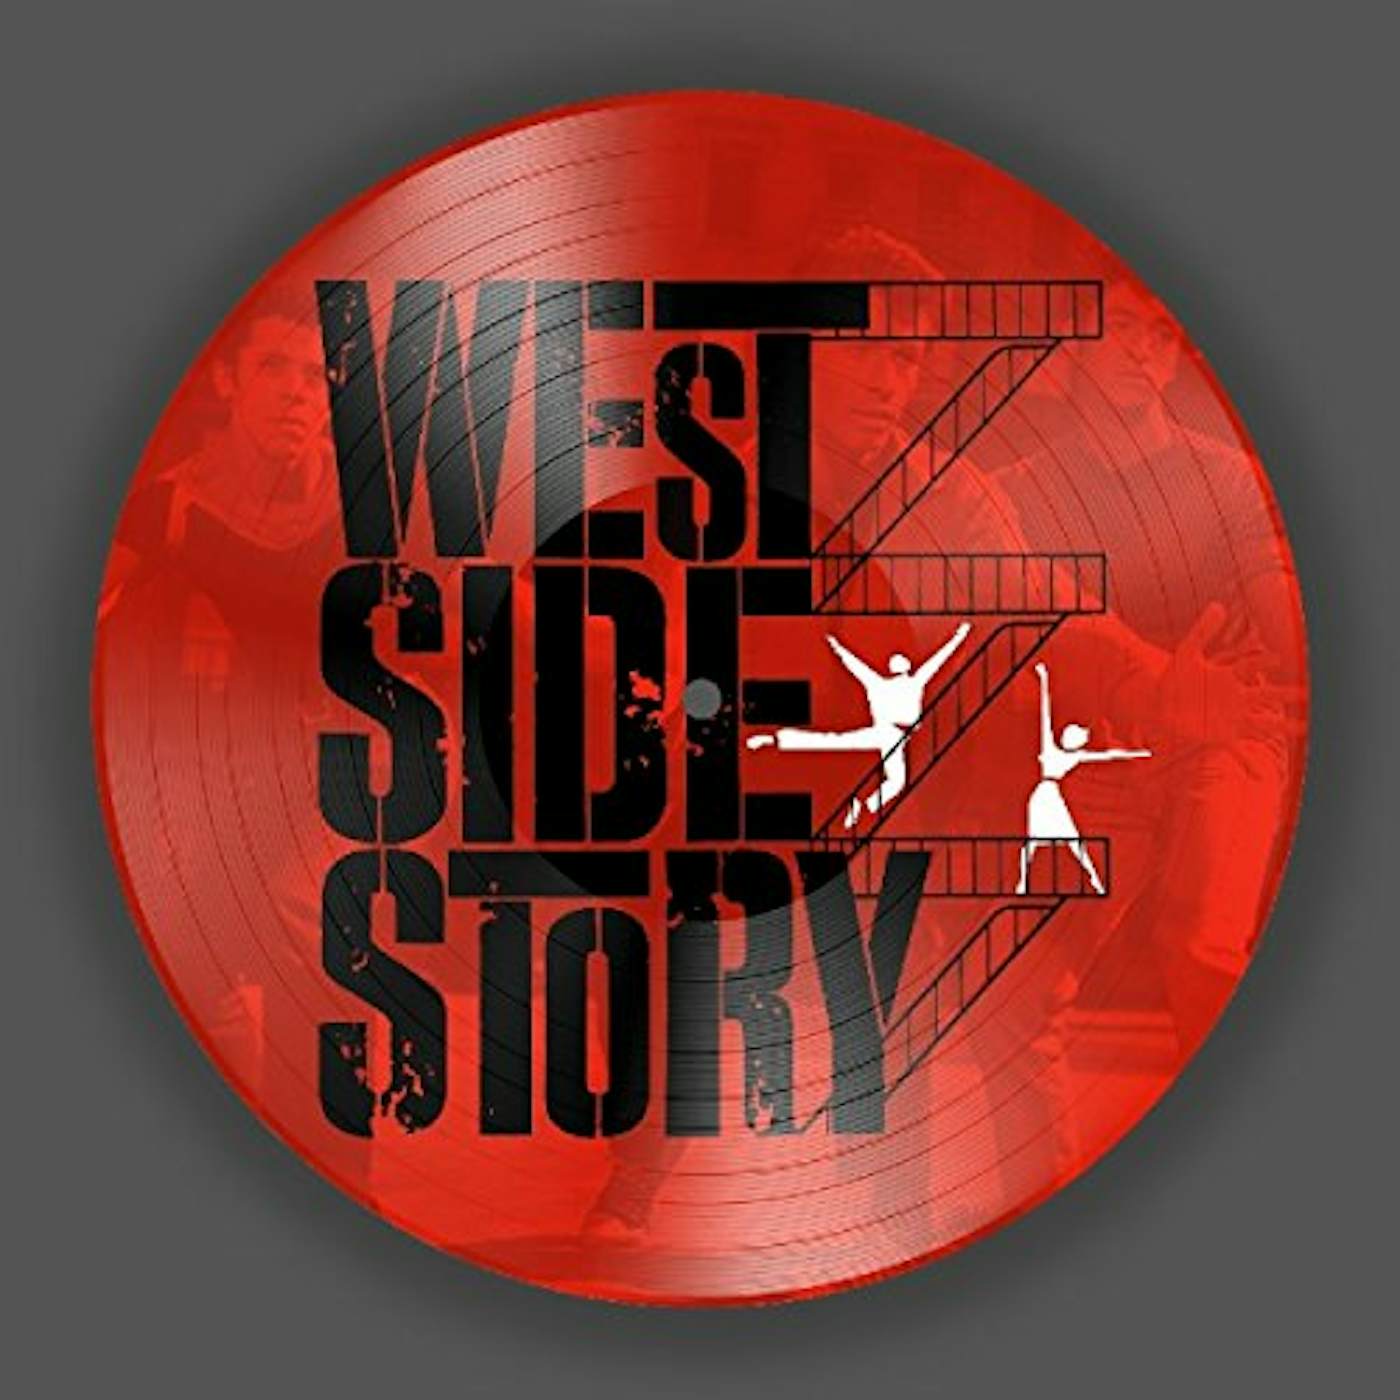 WEST SIDE STORY / O.S.T. Vinyl Record